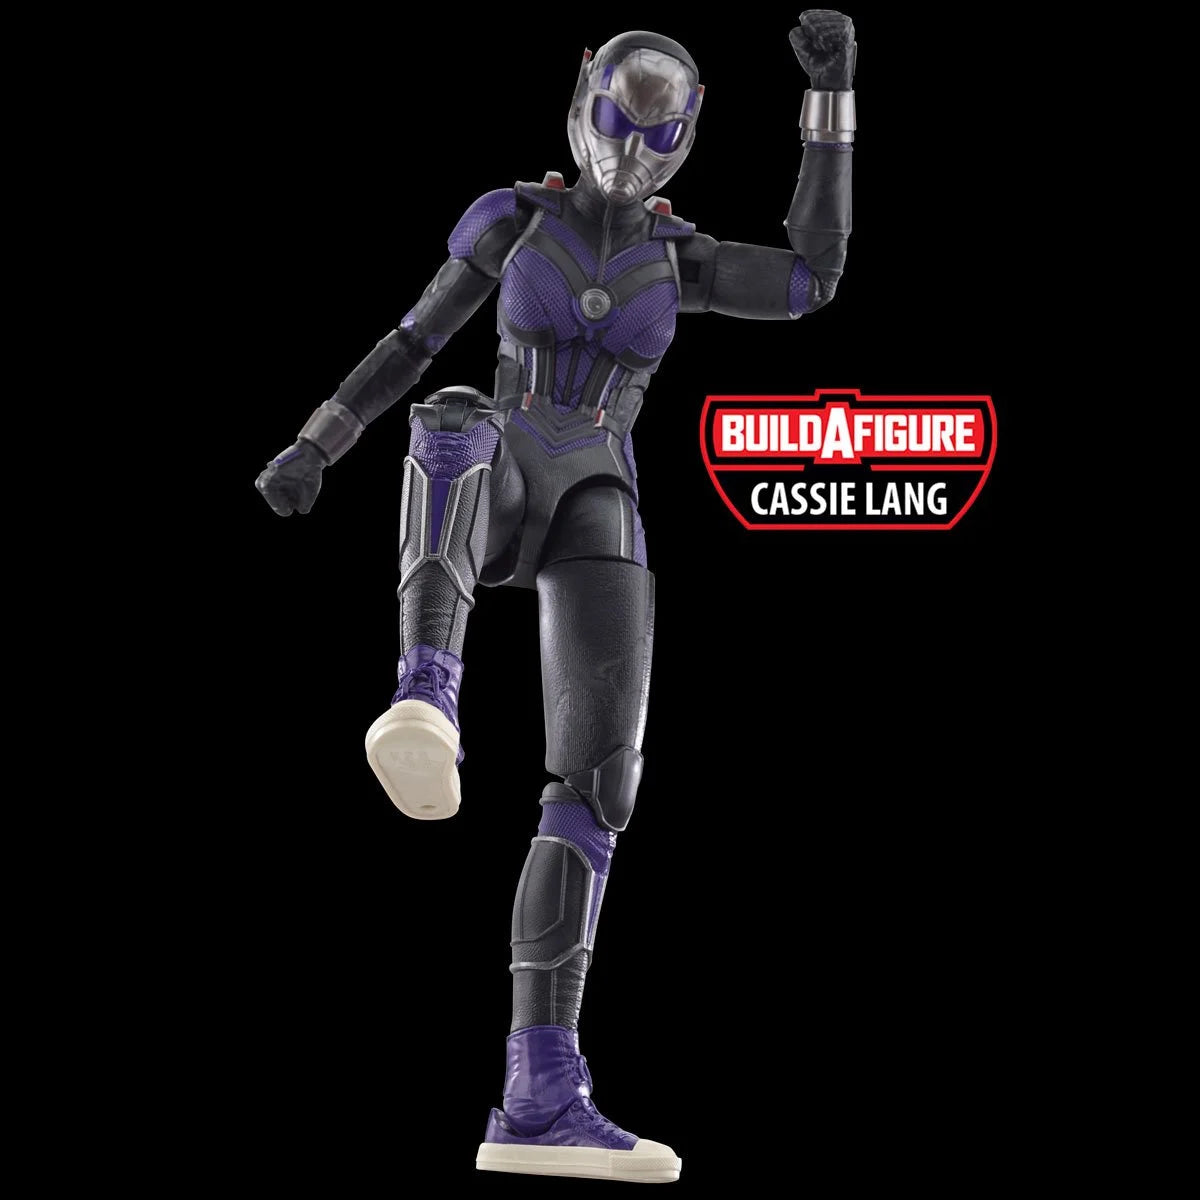 Ant-Man & the Wasp: Quantumania Marvel Legends Marvel's Wasp 6-Inch Action Figure